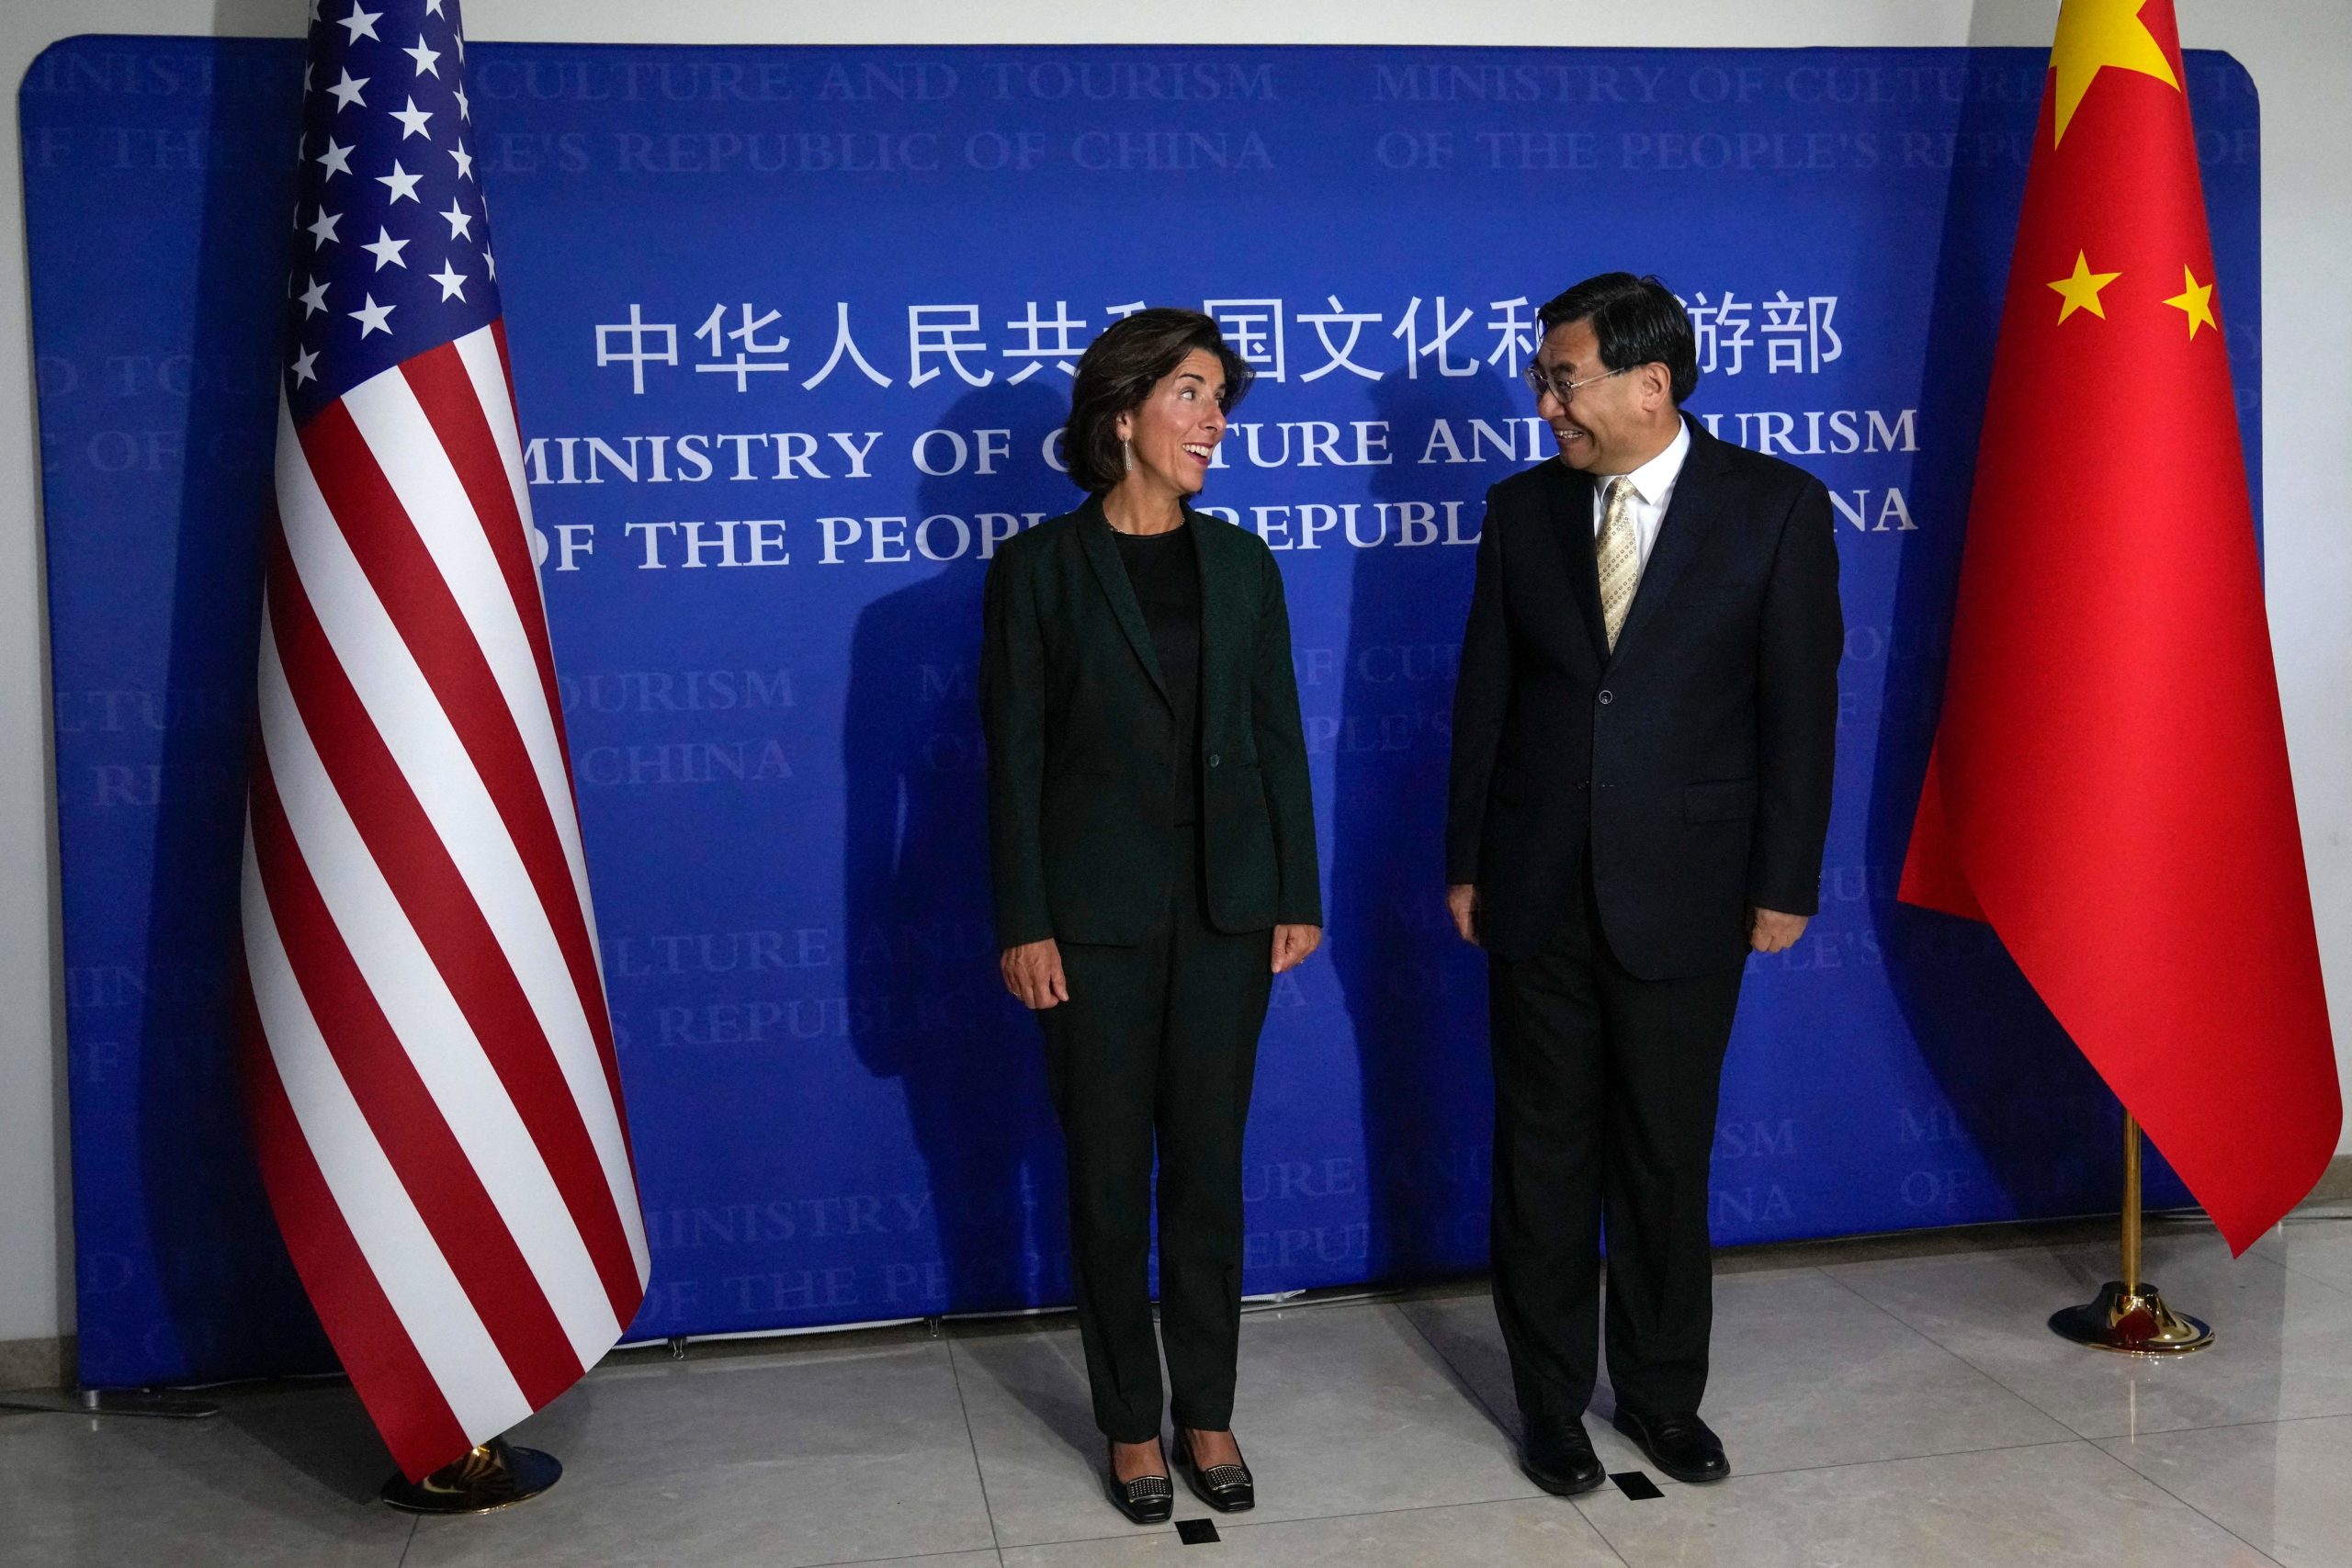 US Commerce Secretary Gina Raimondo (L) meets with Chinese Minister of Culture and Tourism Hu Heping before their meeting at the Ministry of Culture and Tourism in Beijing on August 29, 2023. (Photo by Andy Wong / POOL / AFP) (Photo by ANDY WONG/POOL/AFP via Getty Images)